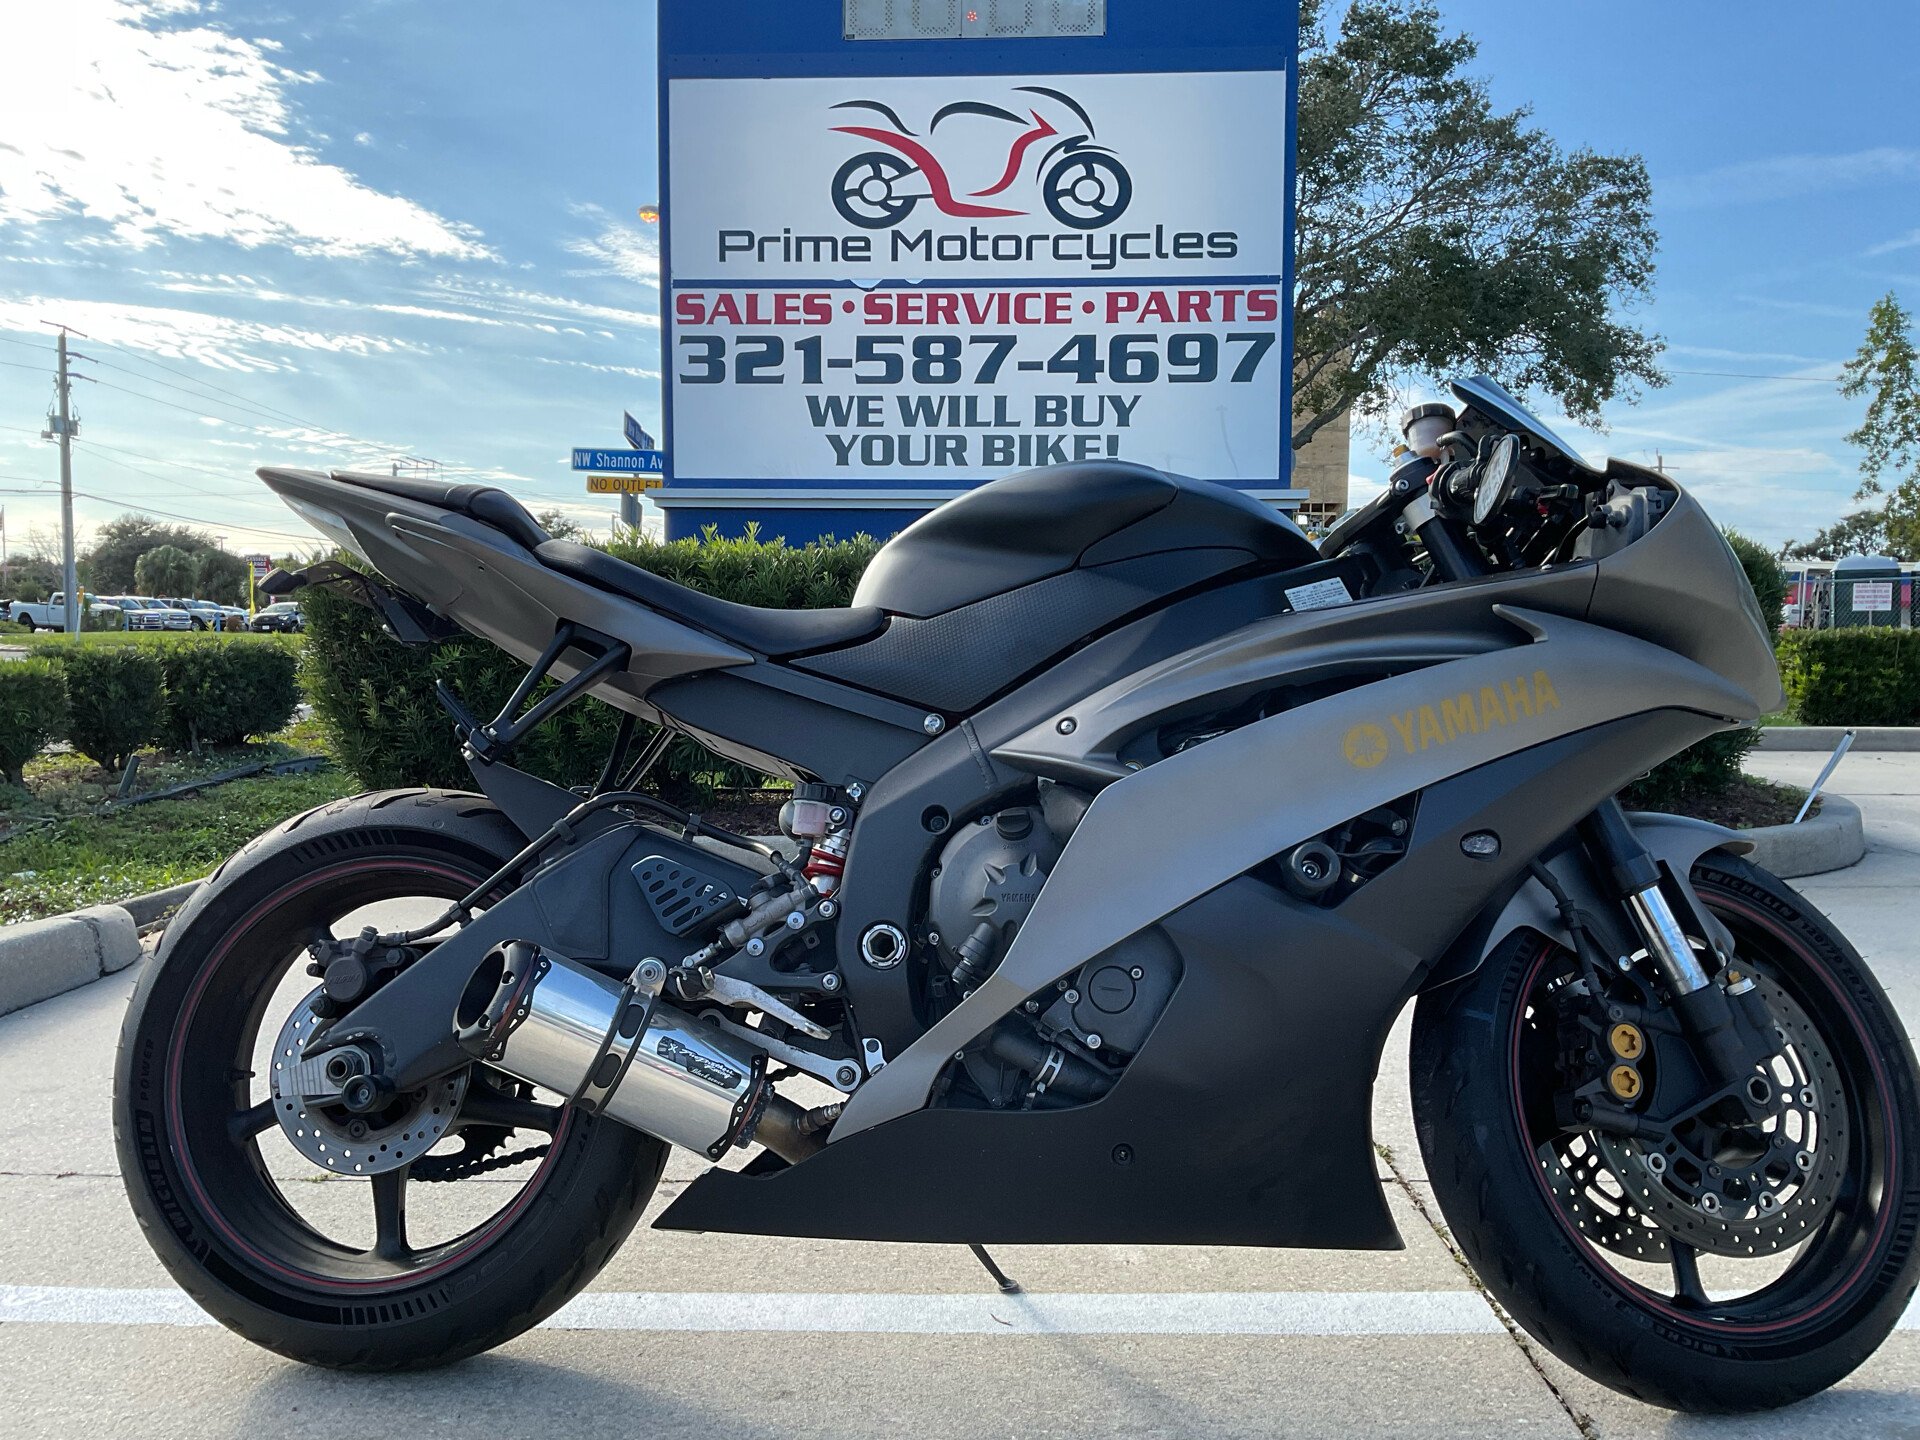 2013 Yamaha YZF-R6 Motorcycles for Sale - Motorcycles on Autotrader